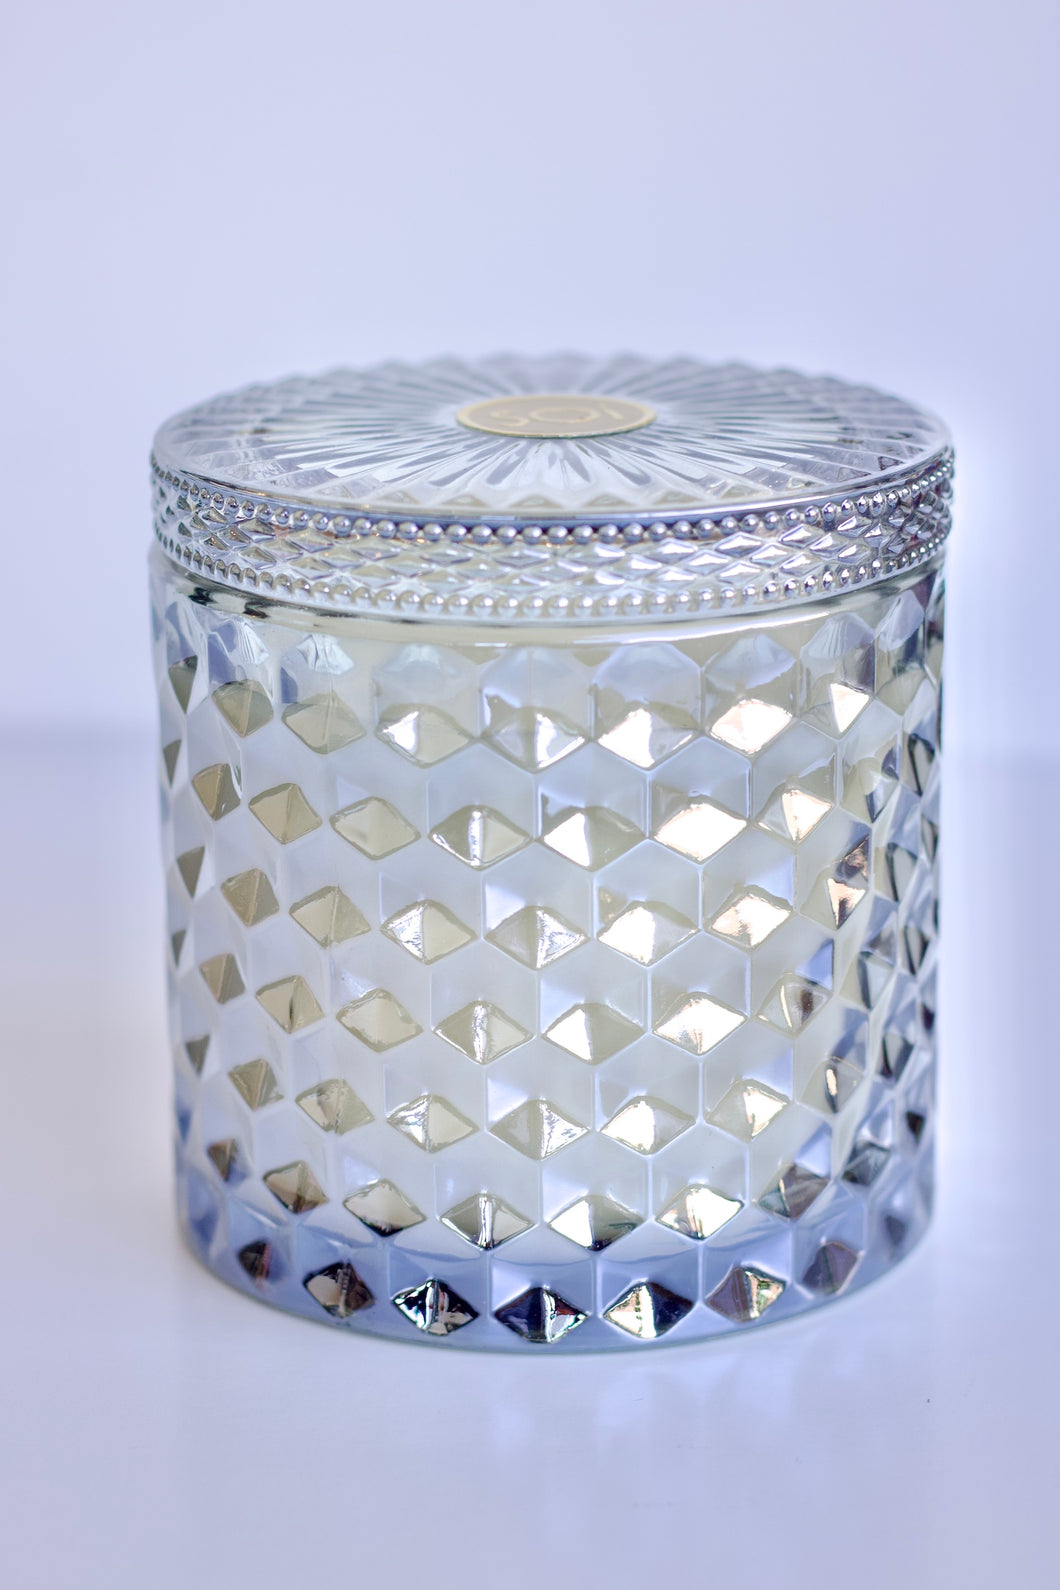 Heathered Suede Shimmer Candle